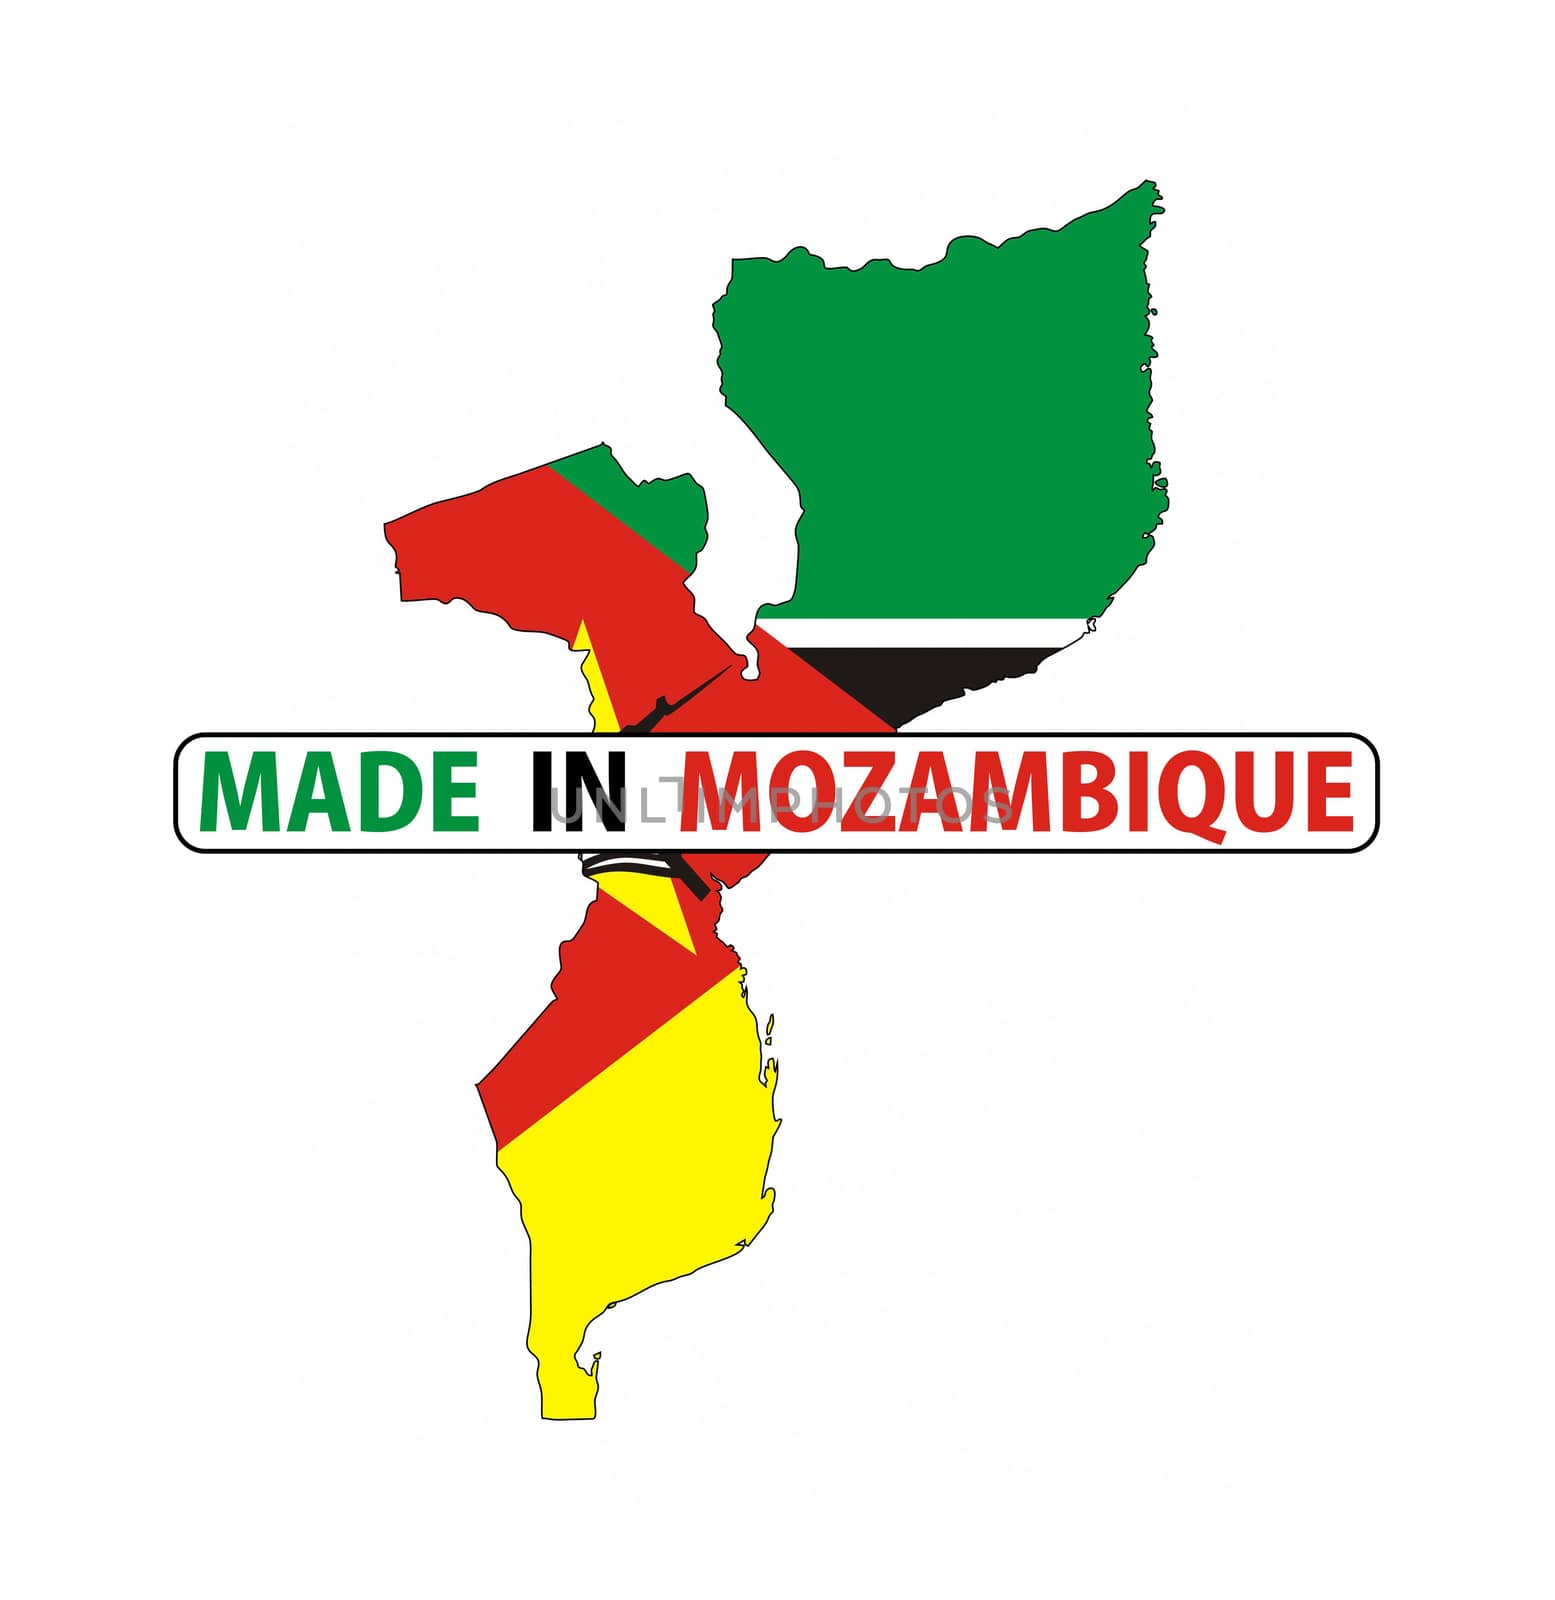 made in mozambique by tony4urban